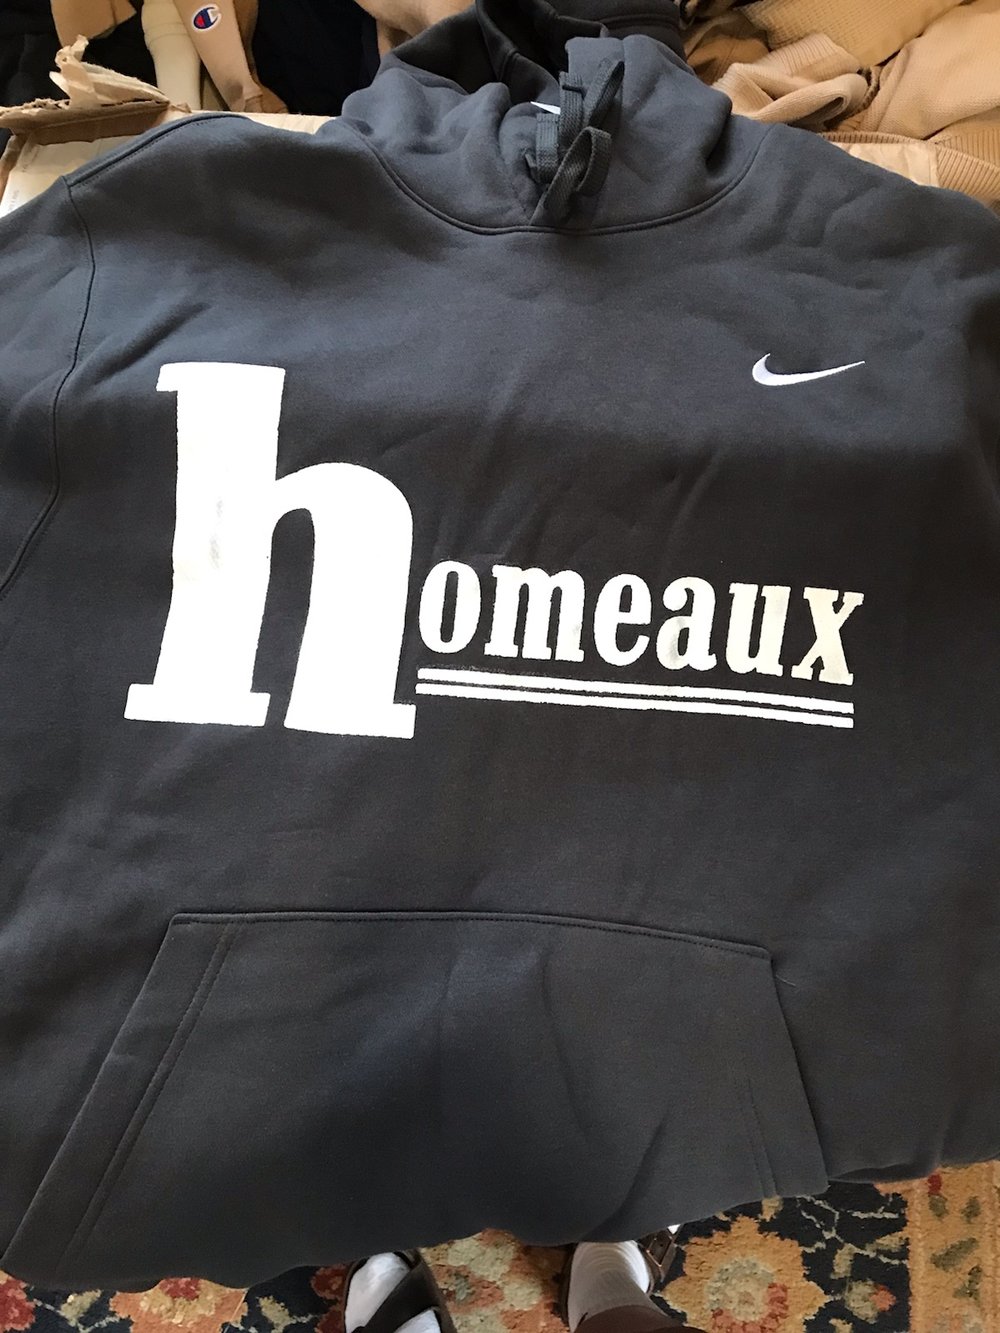 M& L Homeaux sweaters/hoodies on hand**limited sizes